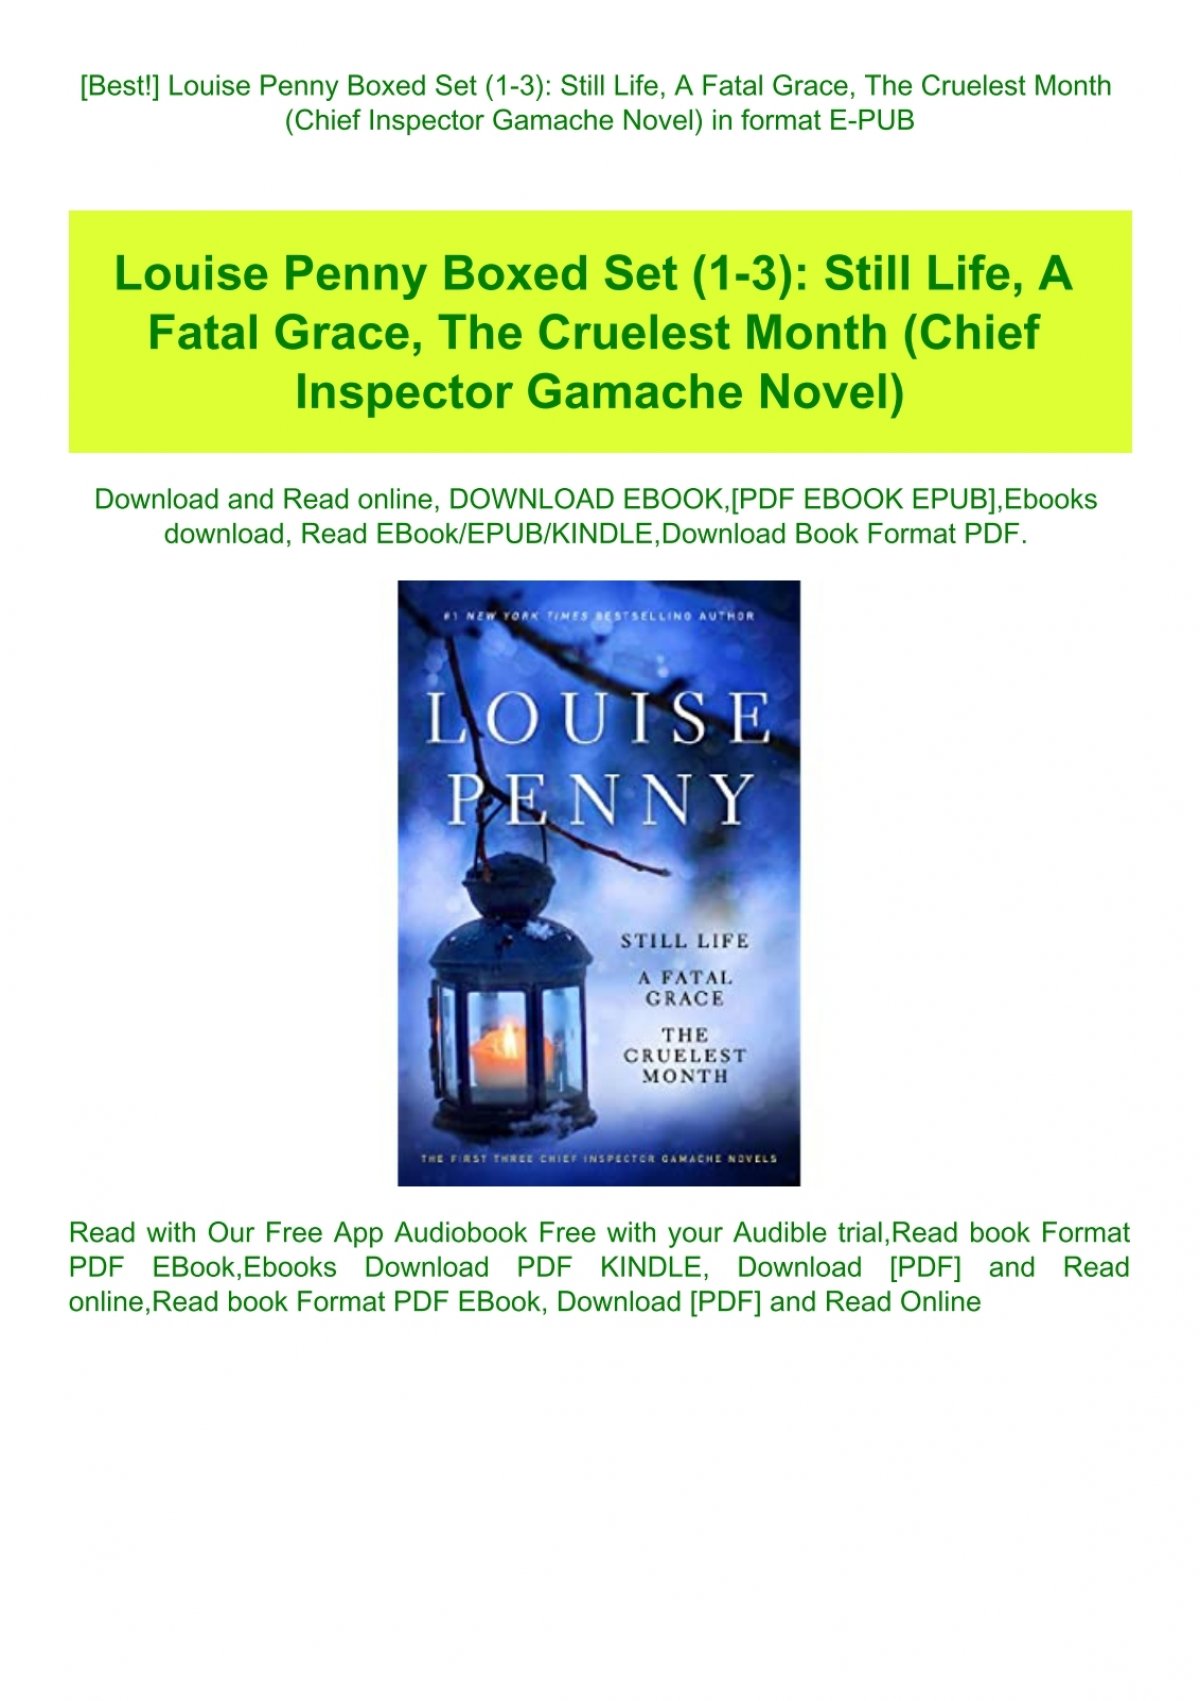 Still Life (Chief Inspector Armand Gamache, #1) by Louise Penny